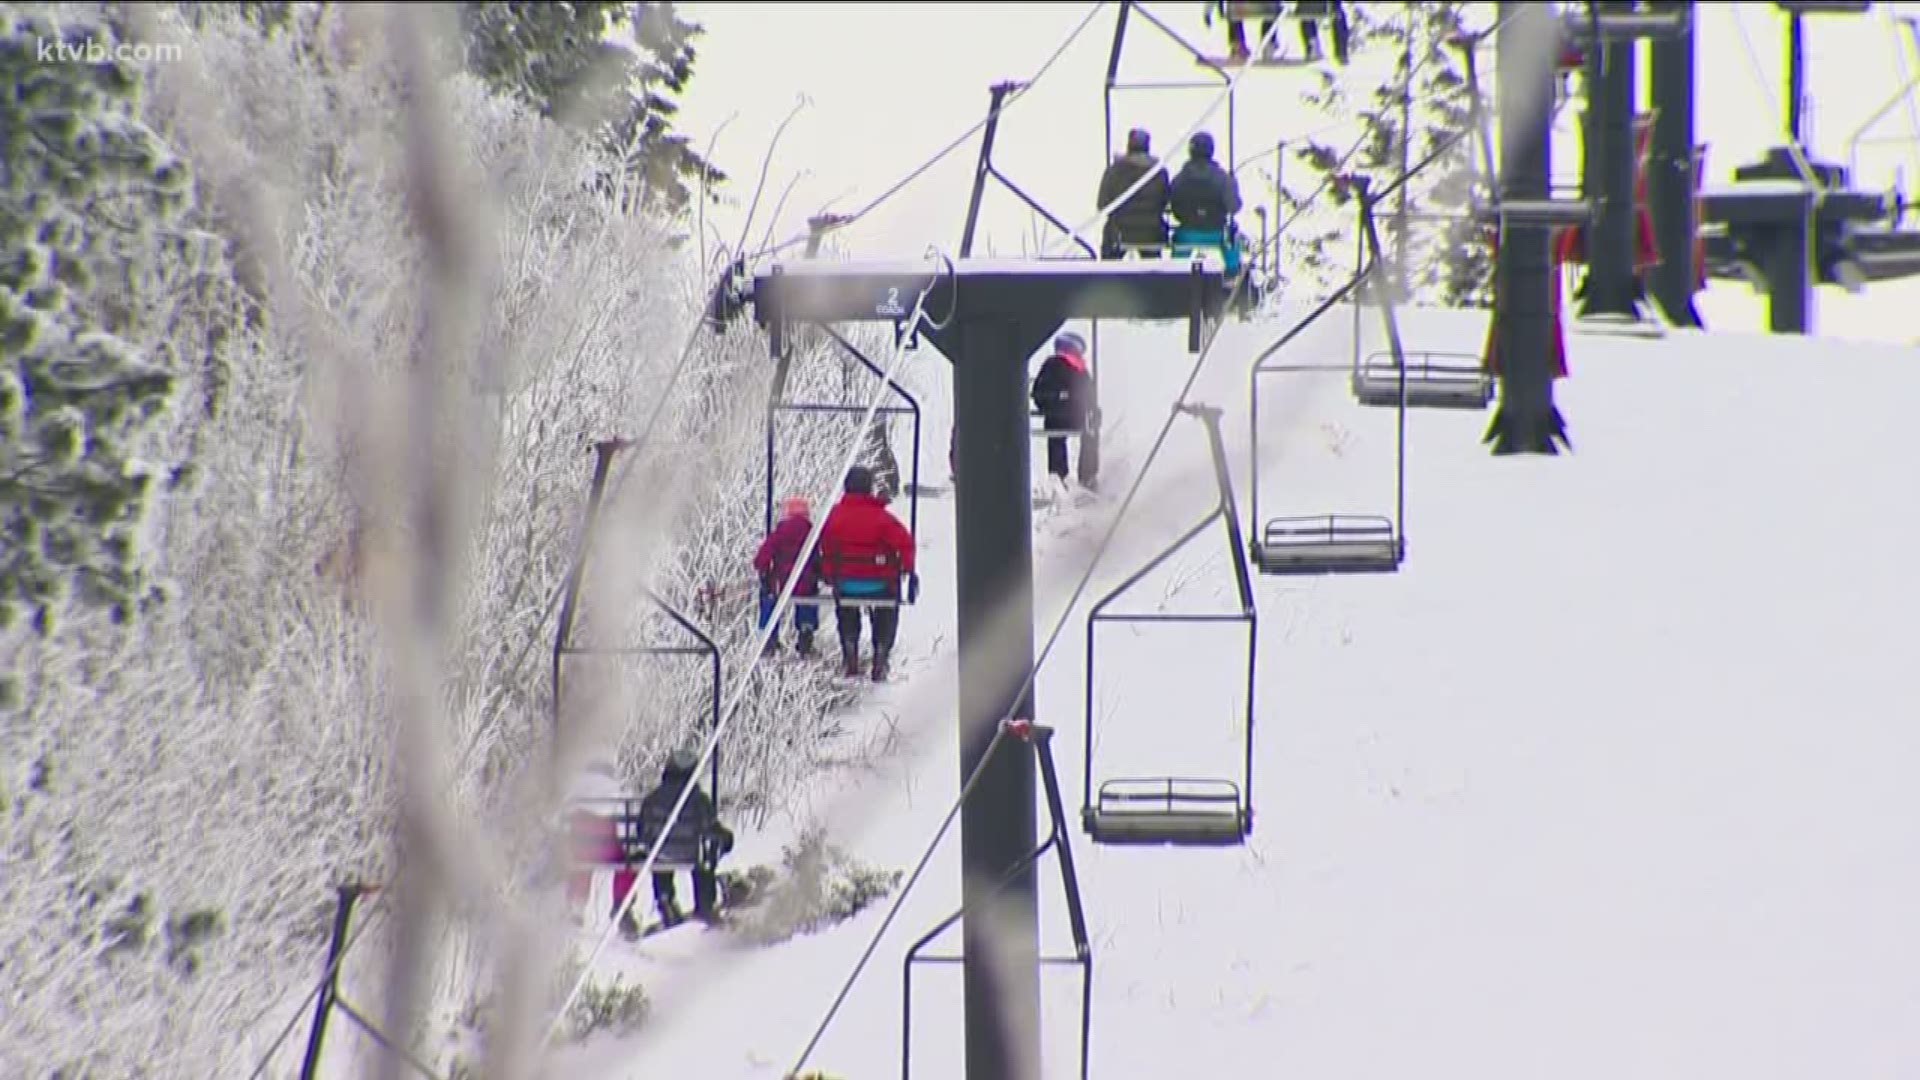 Sun Valley plans to open on Thanksgiving, while the opening for Bogus Basin is delayed.